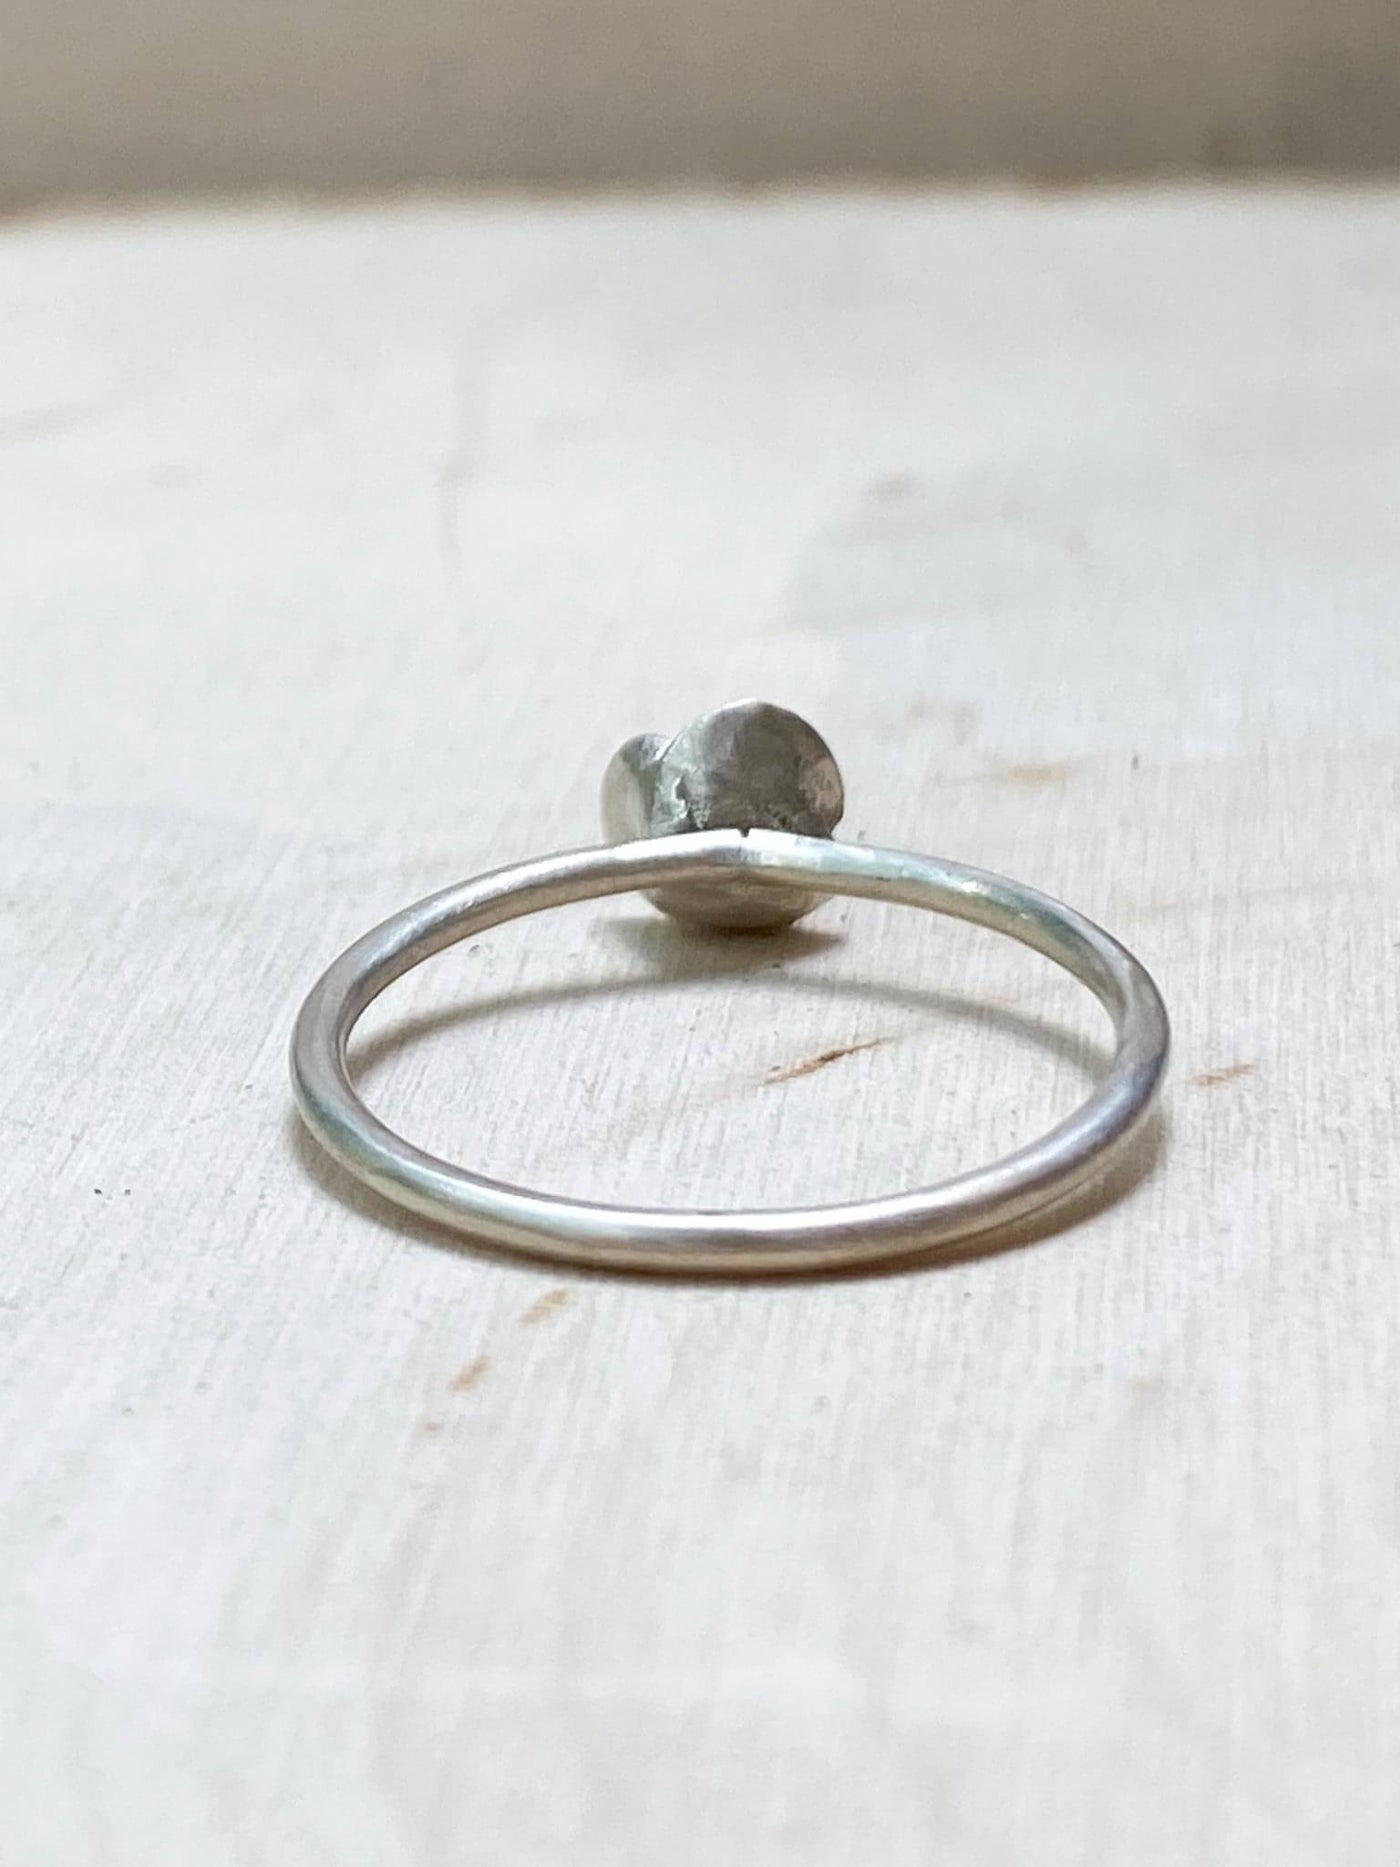 Rose Bud Ring - Silver Lily Studio